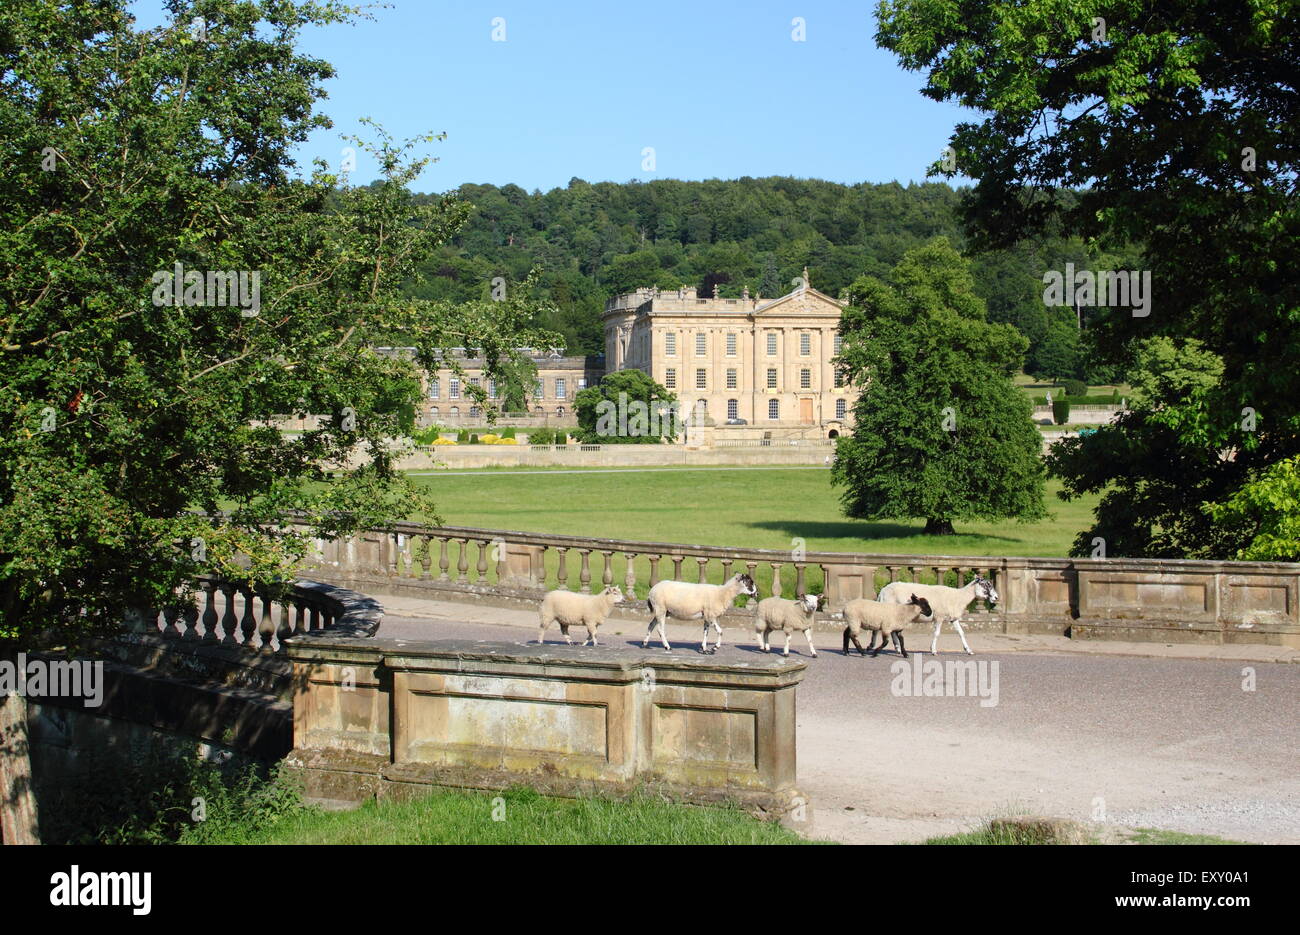 Chatsworth House, an historic English stately home in the Peak District National Park, Derbyshire England UK Stock Photo